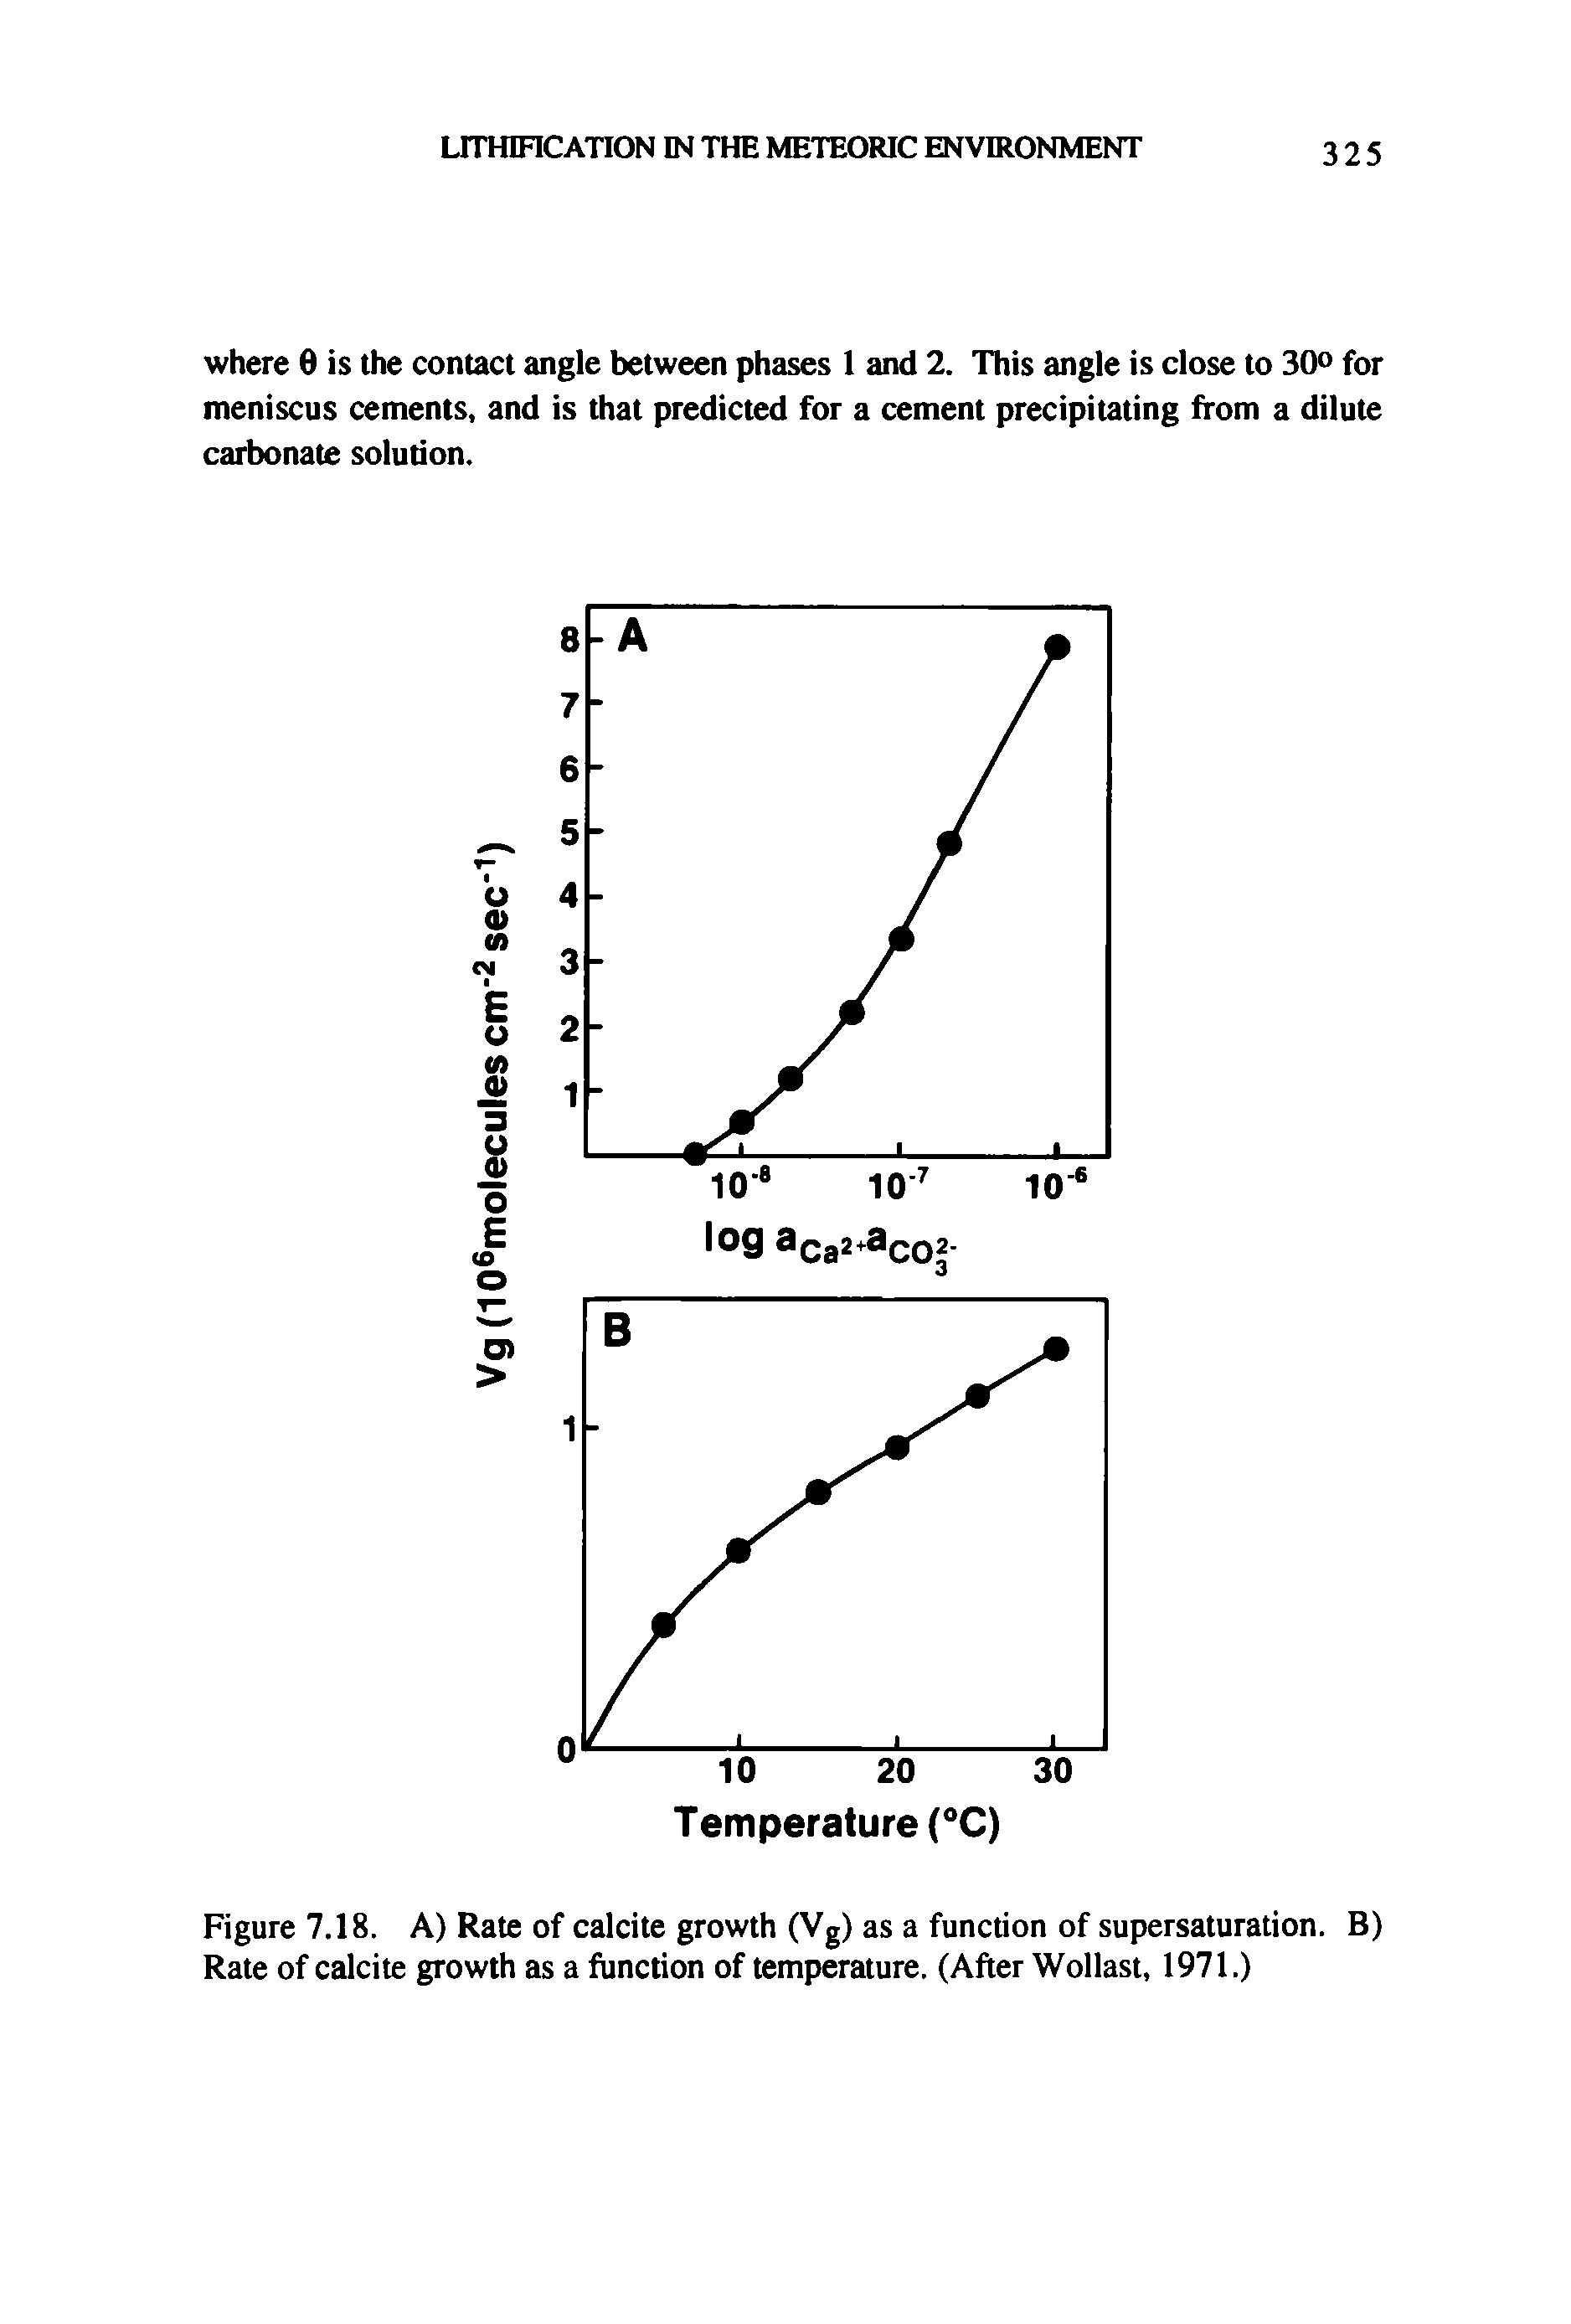 Figure 7.18. A) Rate of calcite growth (Vg) as a function of supersaturation. B) Rate of calcite growth as a function of temperature. (After Wollast, 1971.)...